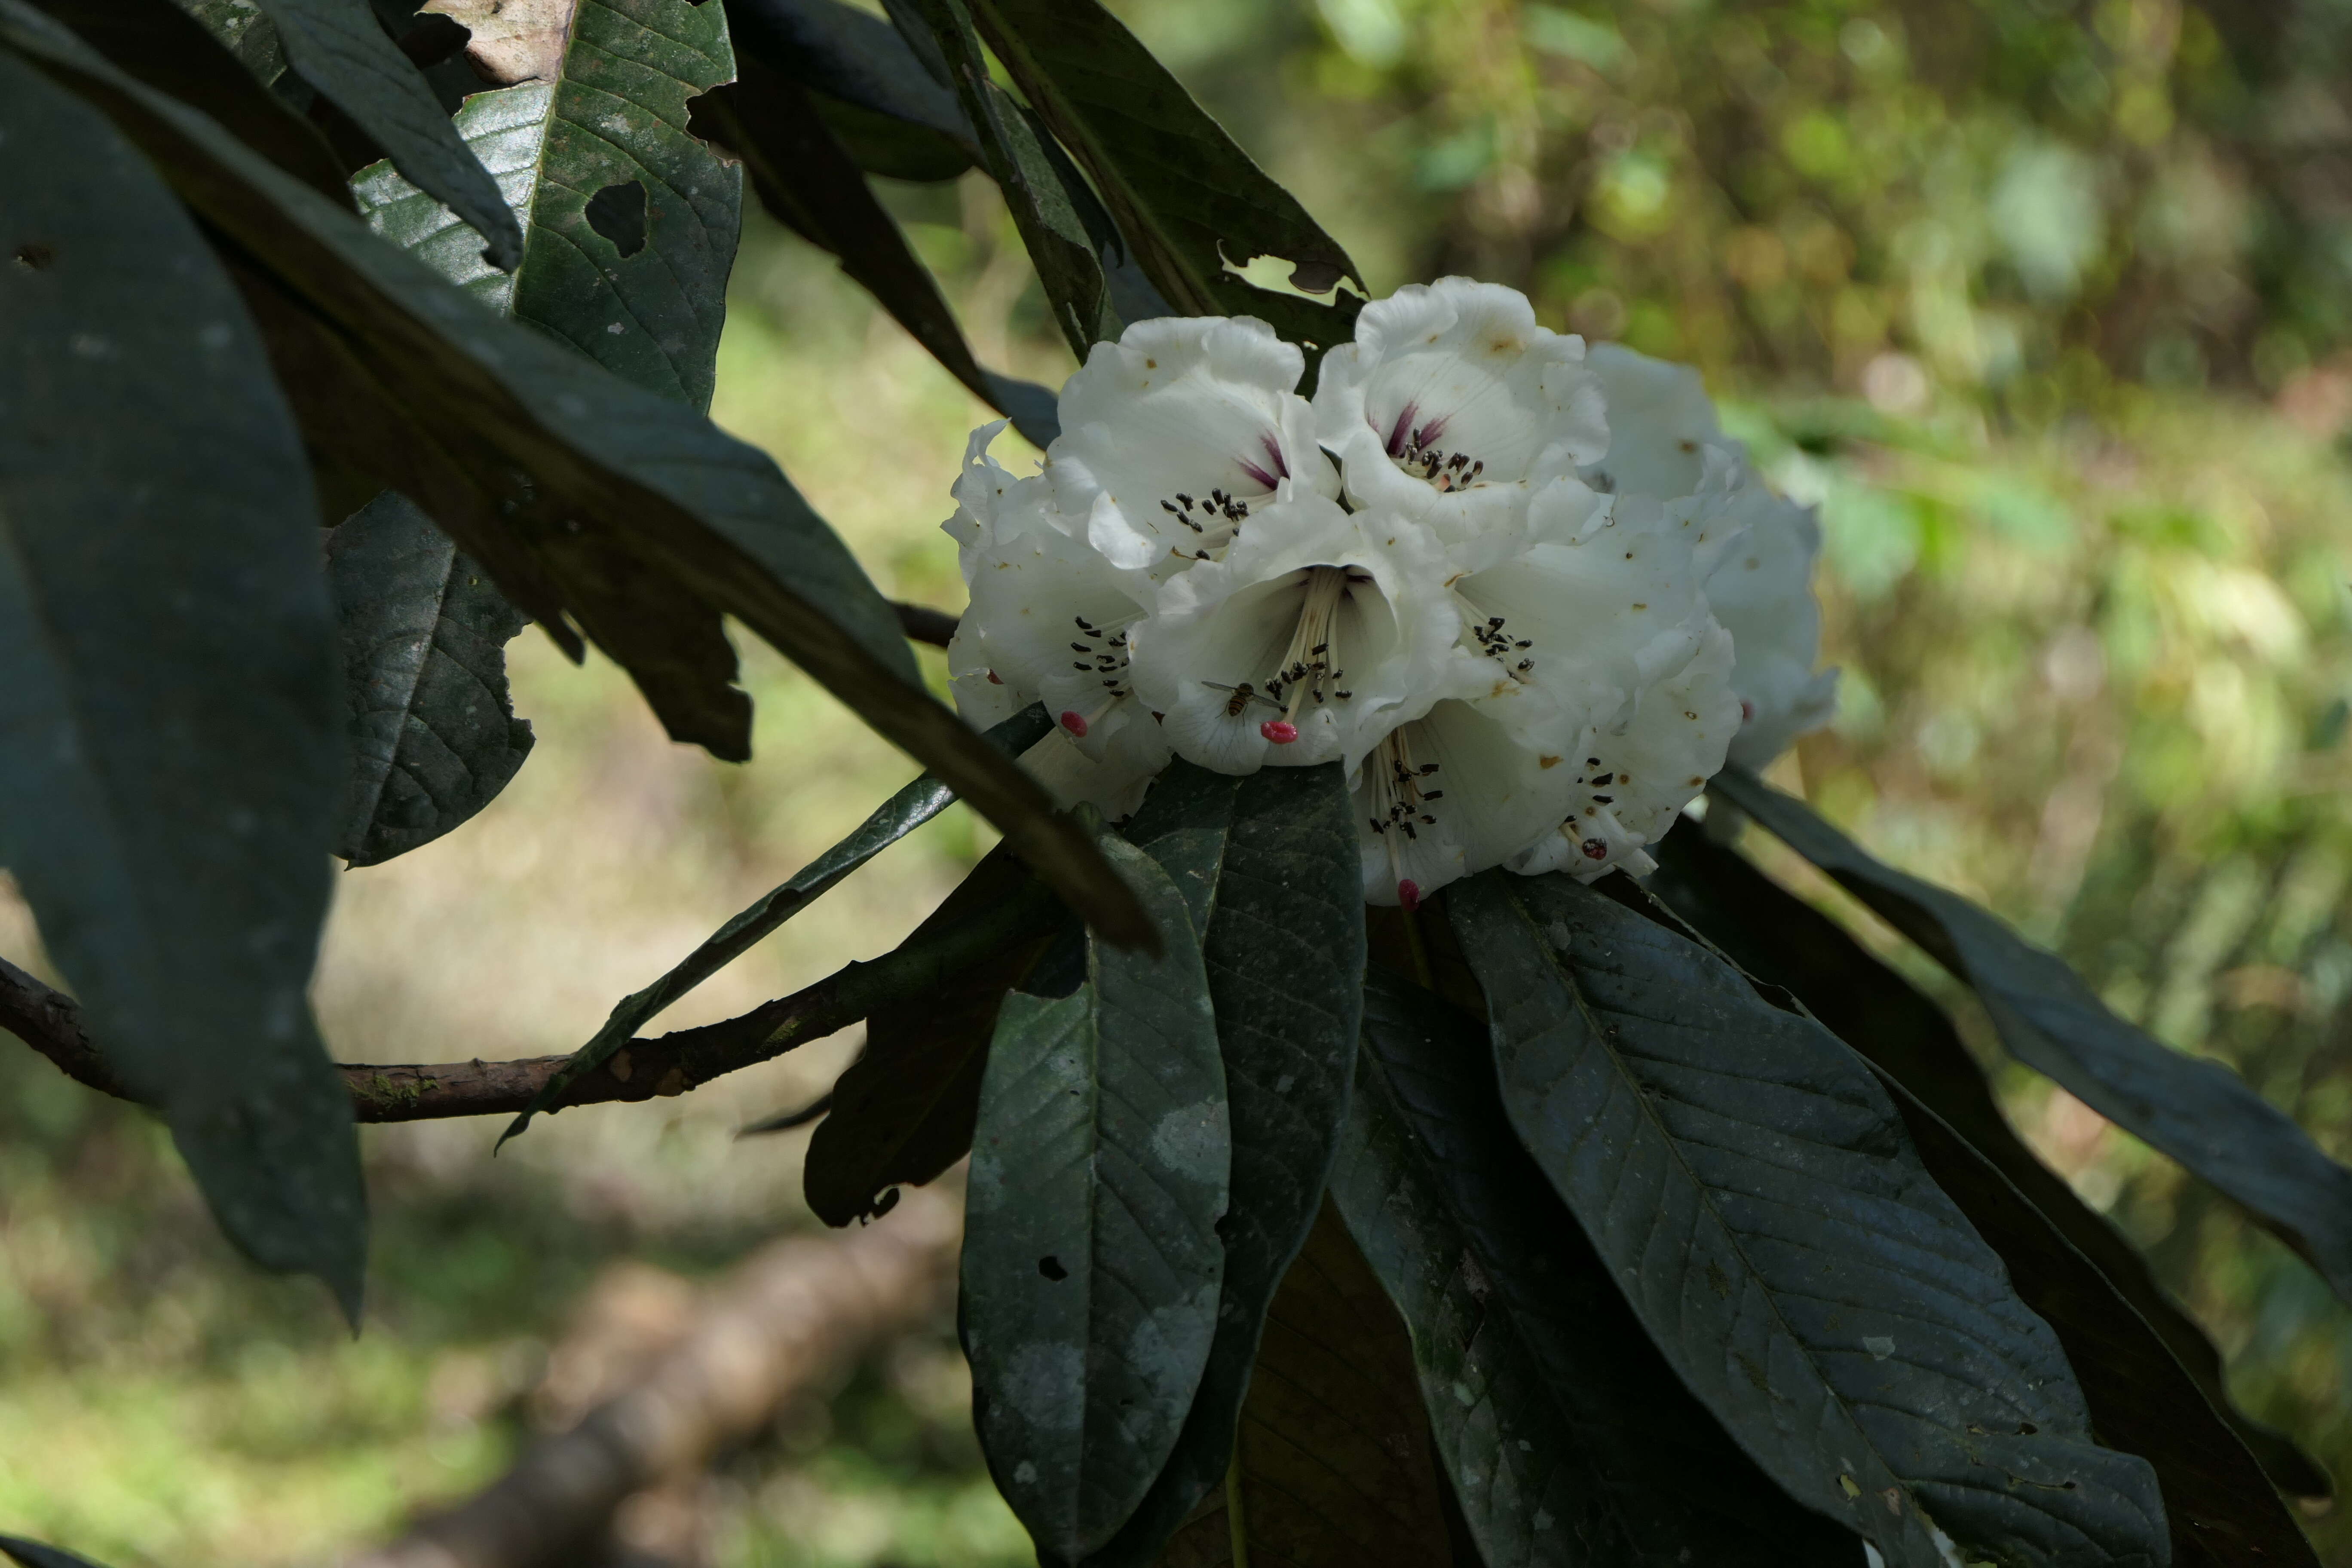 Image of Rhododendron grande Wight